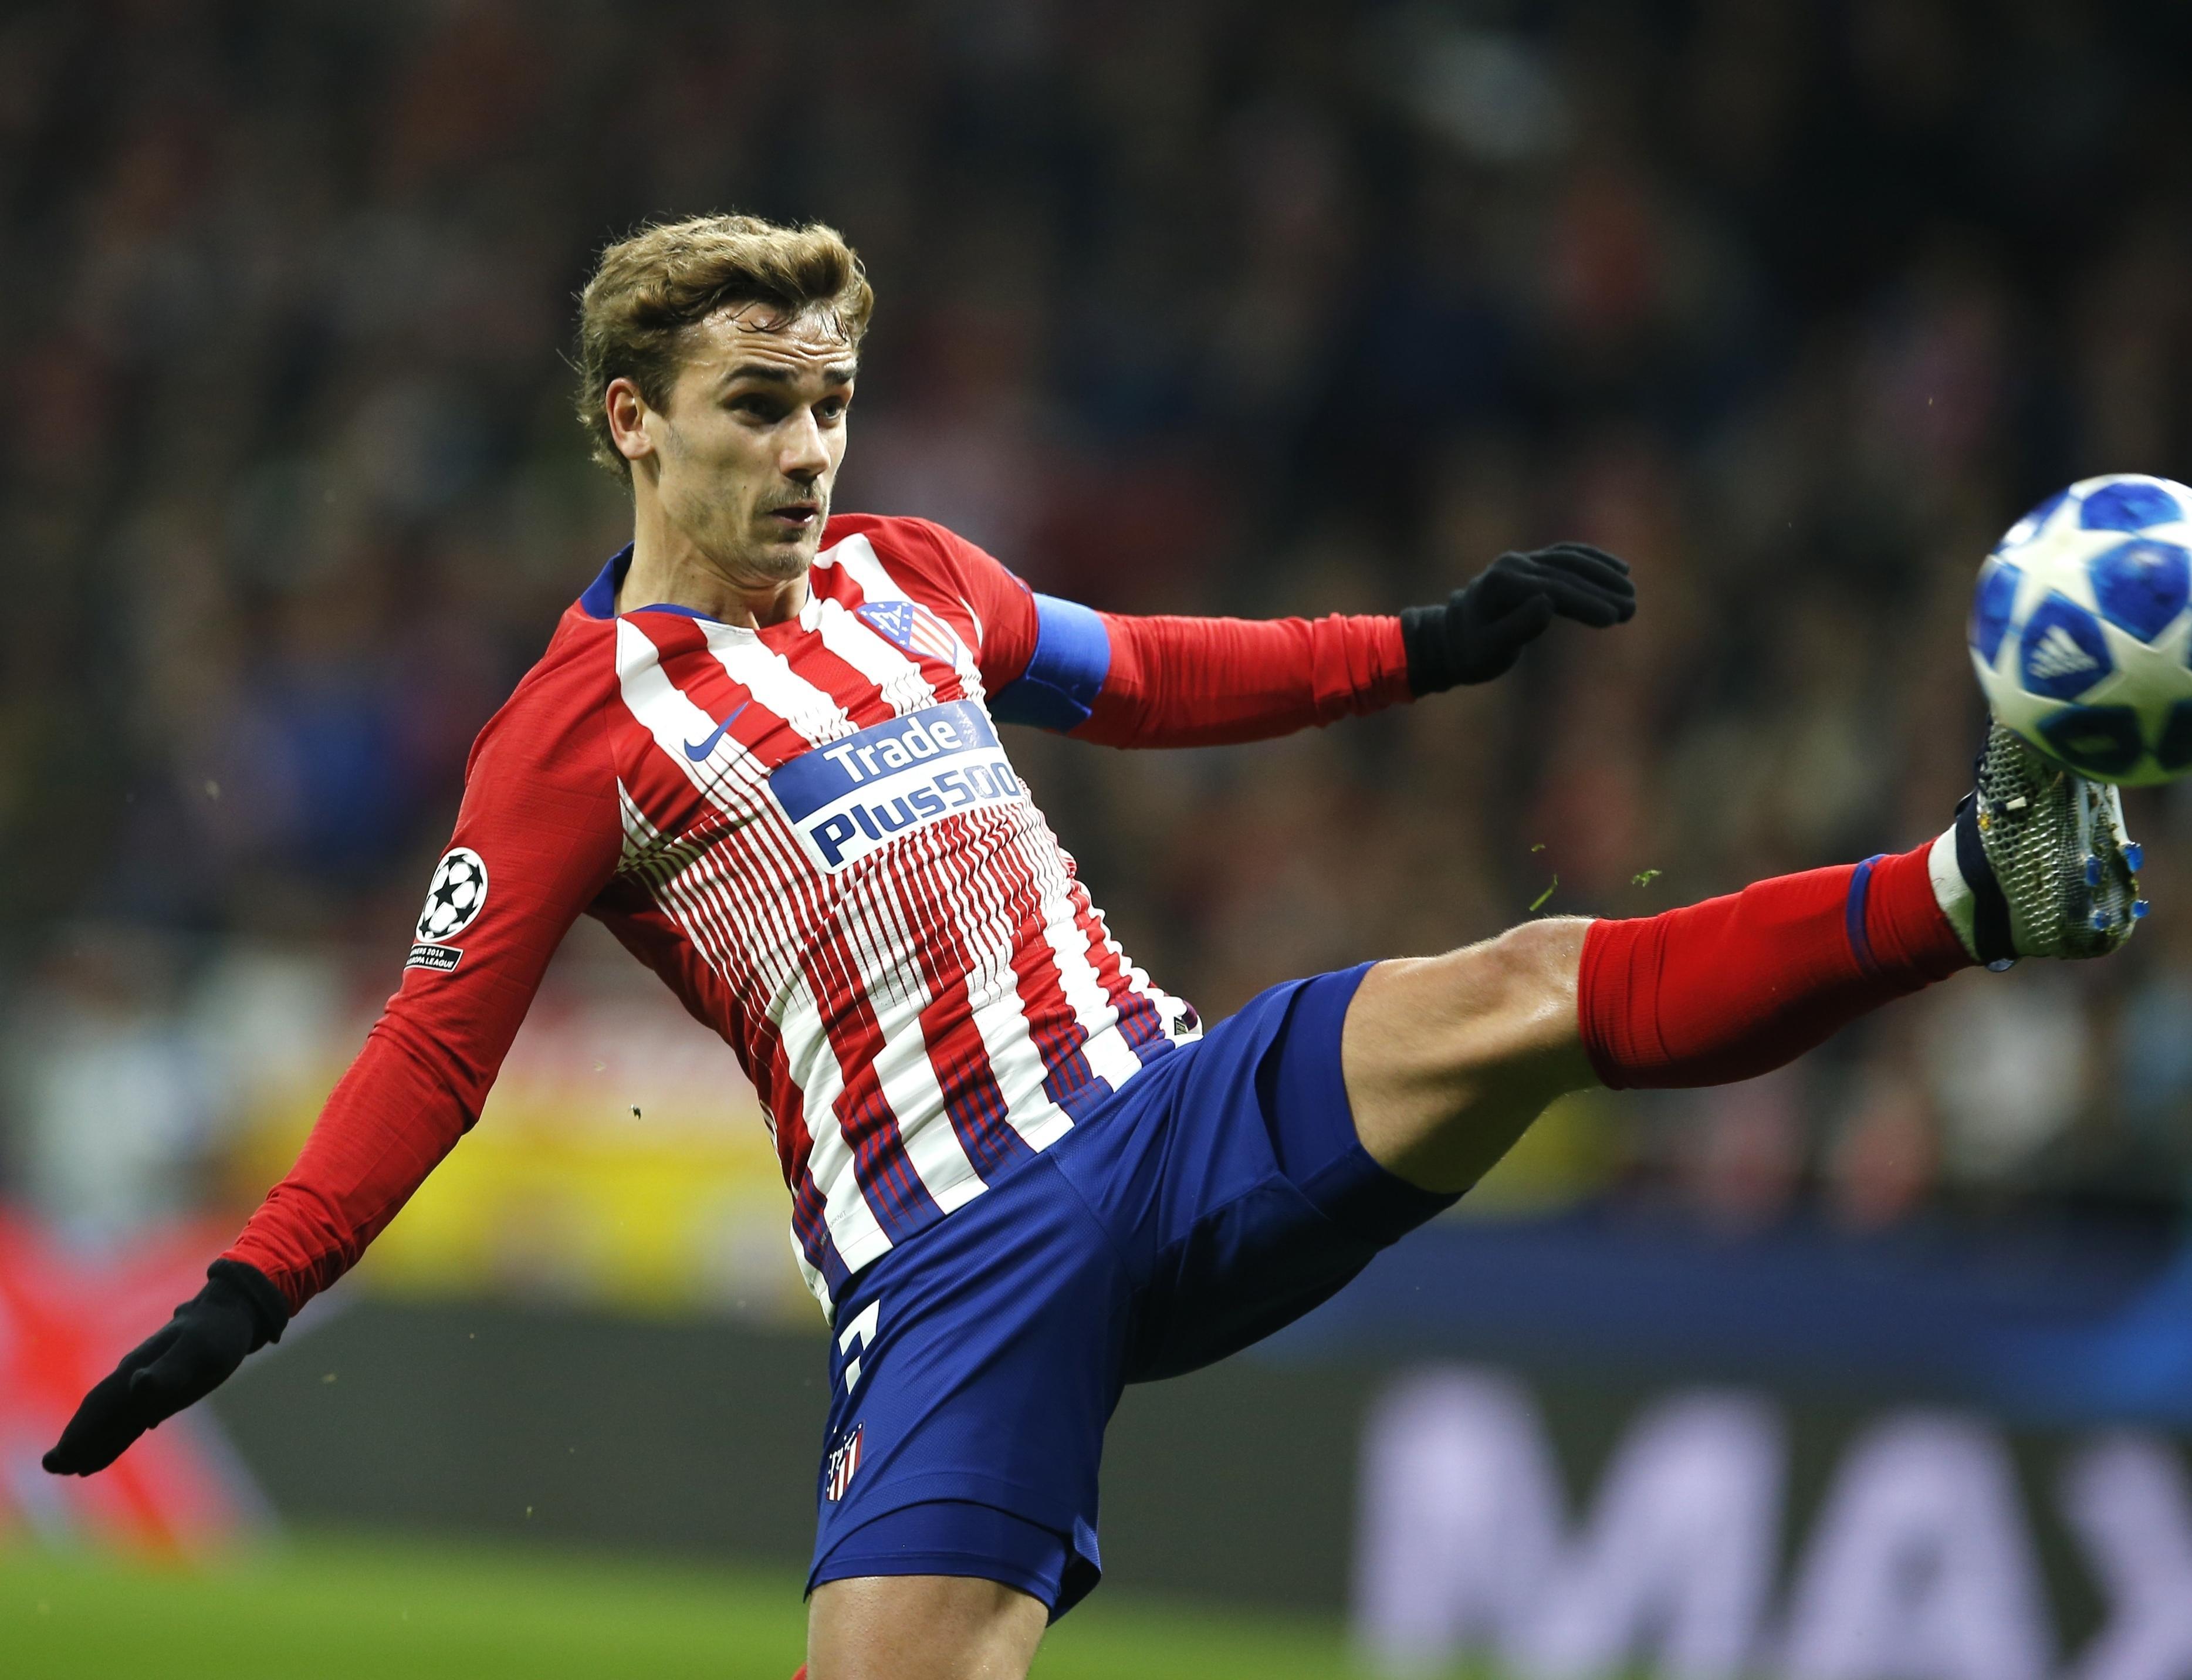  Antoine Griezmann, a soccer player wearing an Atletico Madrid uniform, is in mid-stride kicking a soccer ball.